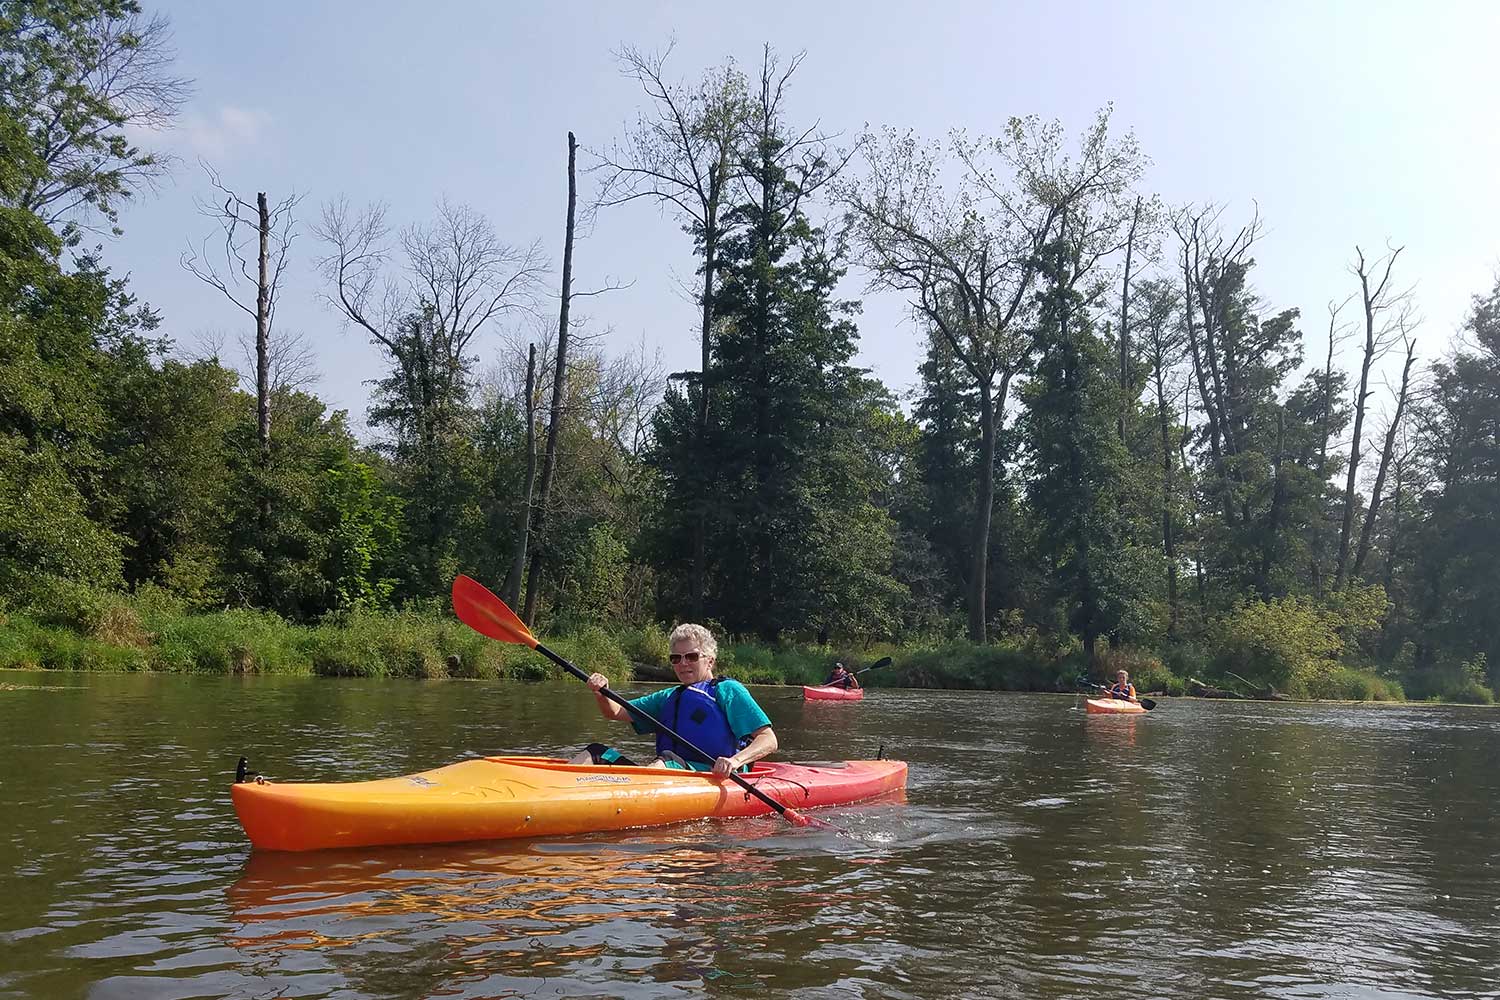 A person kayaking in a river with two more kayakers in the background.